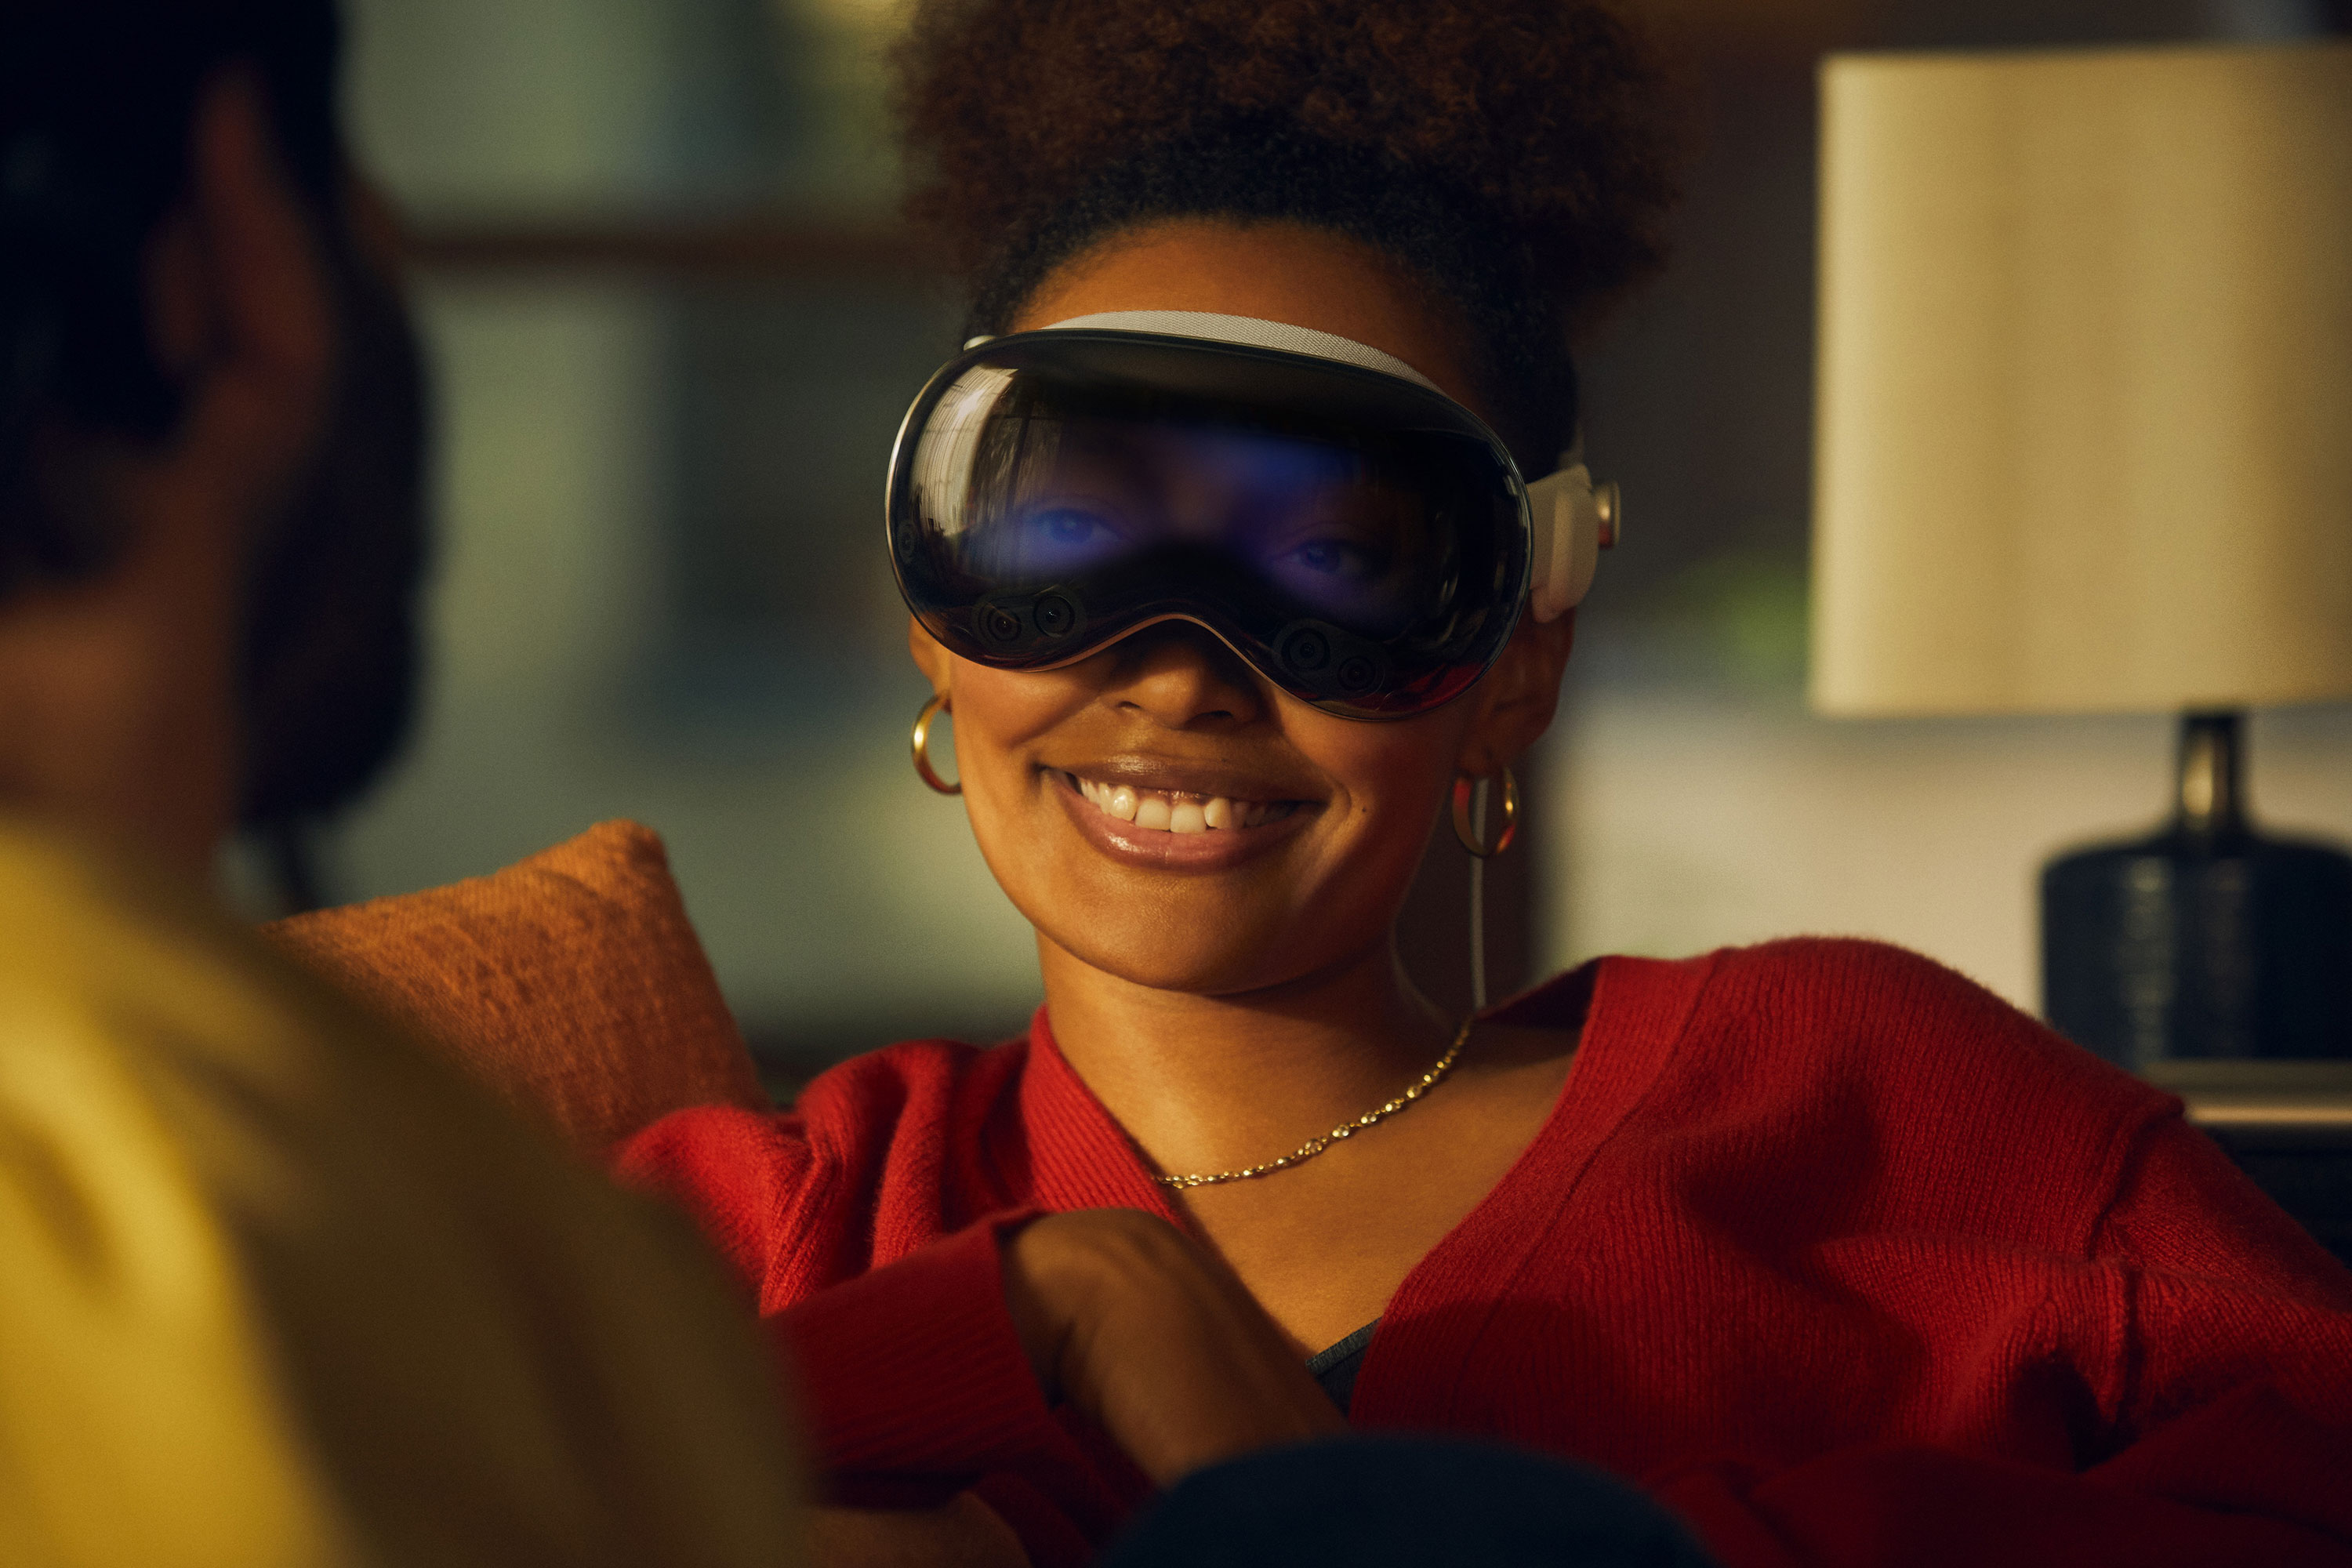 Demonstrating Vision Pro’s hybrid screen, users can naturally maintain eye contact during conversation and other interactions. Image via Apple.